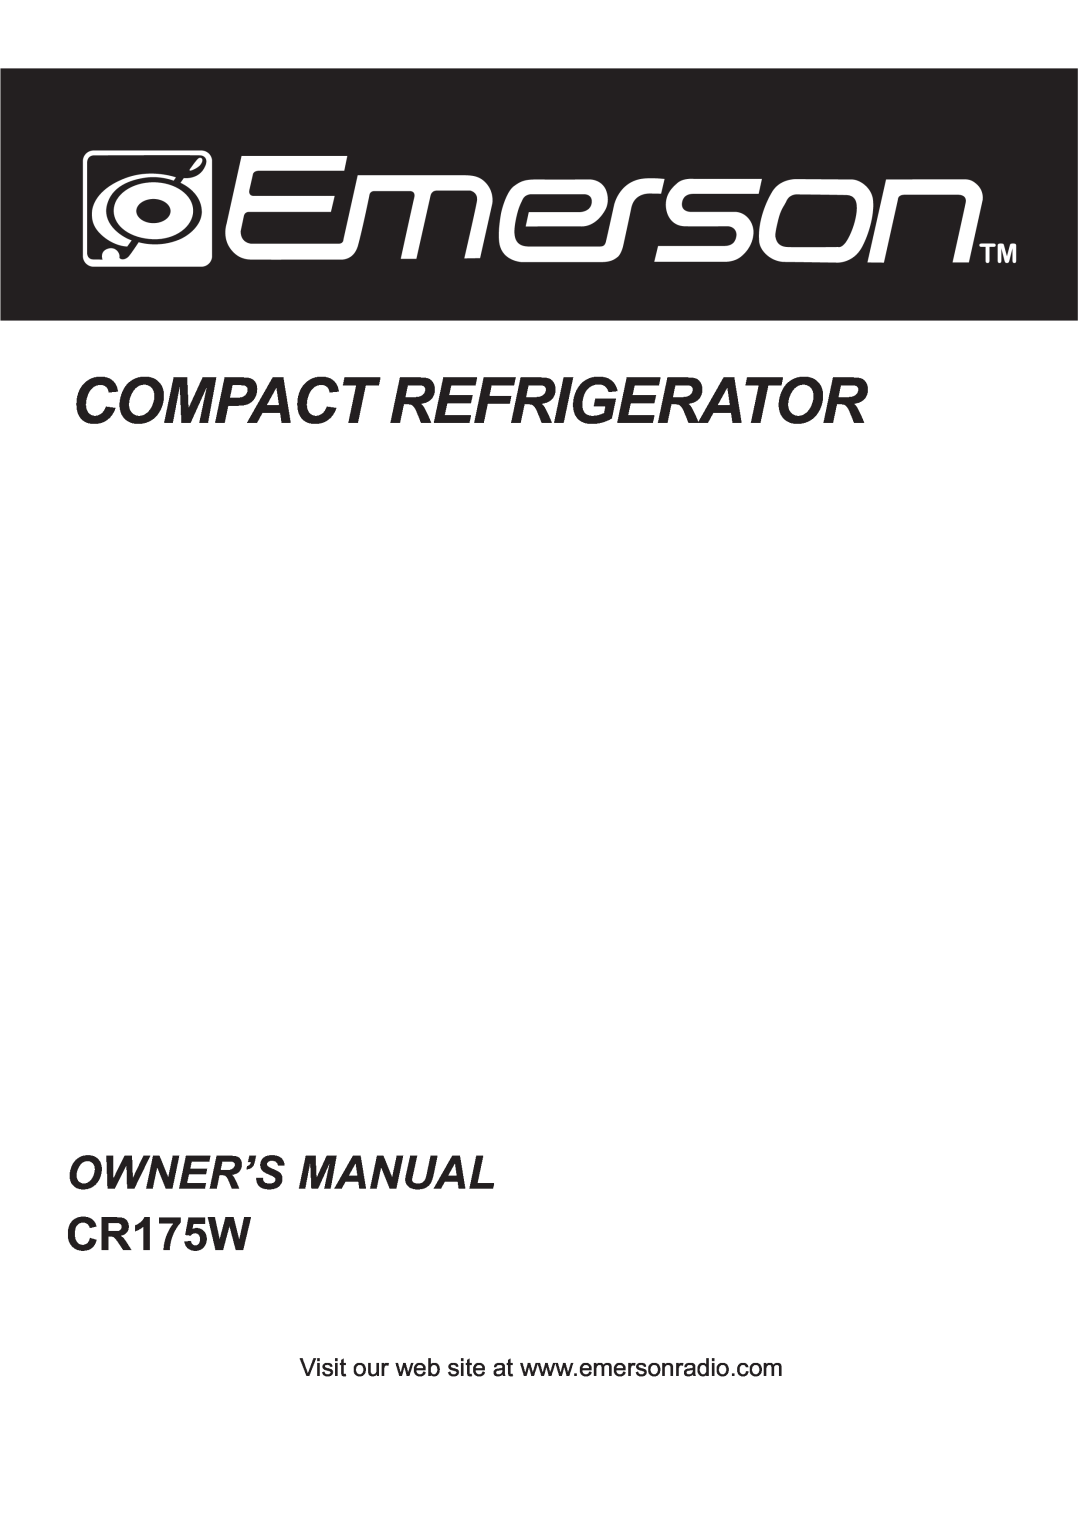 Emerson CR175W owner manual Compact Refrigerator 